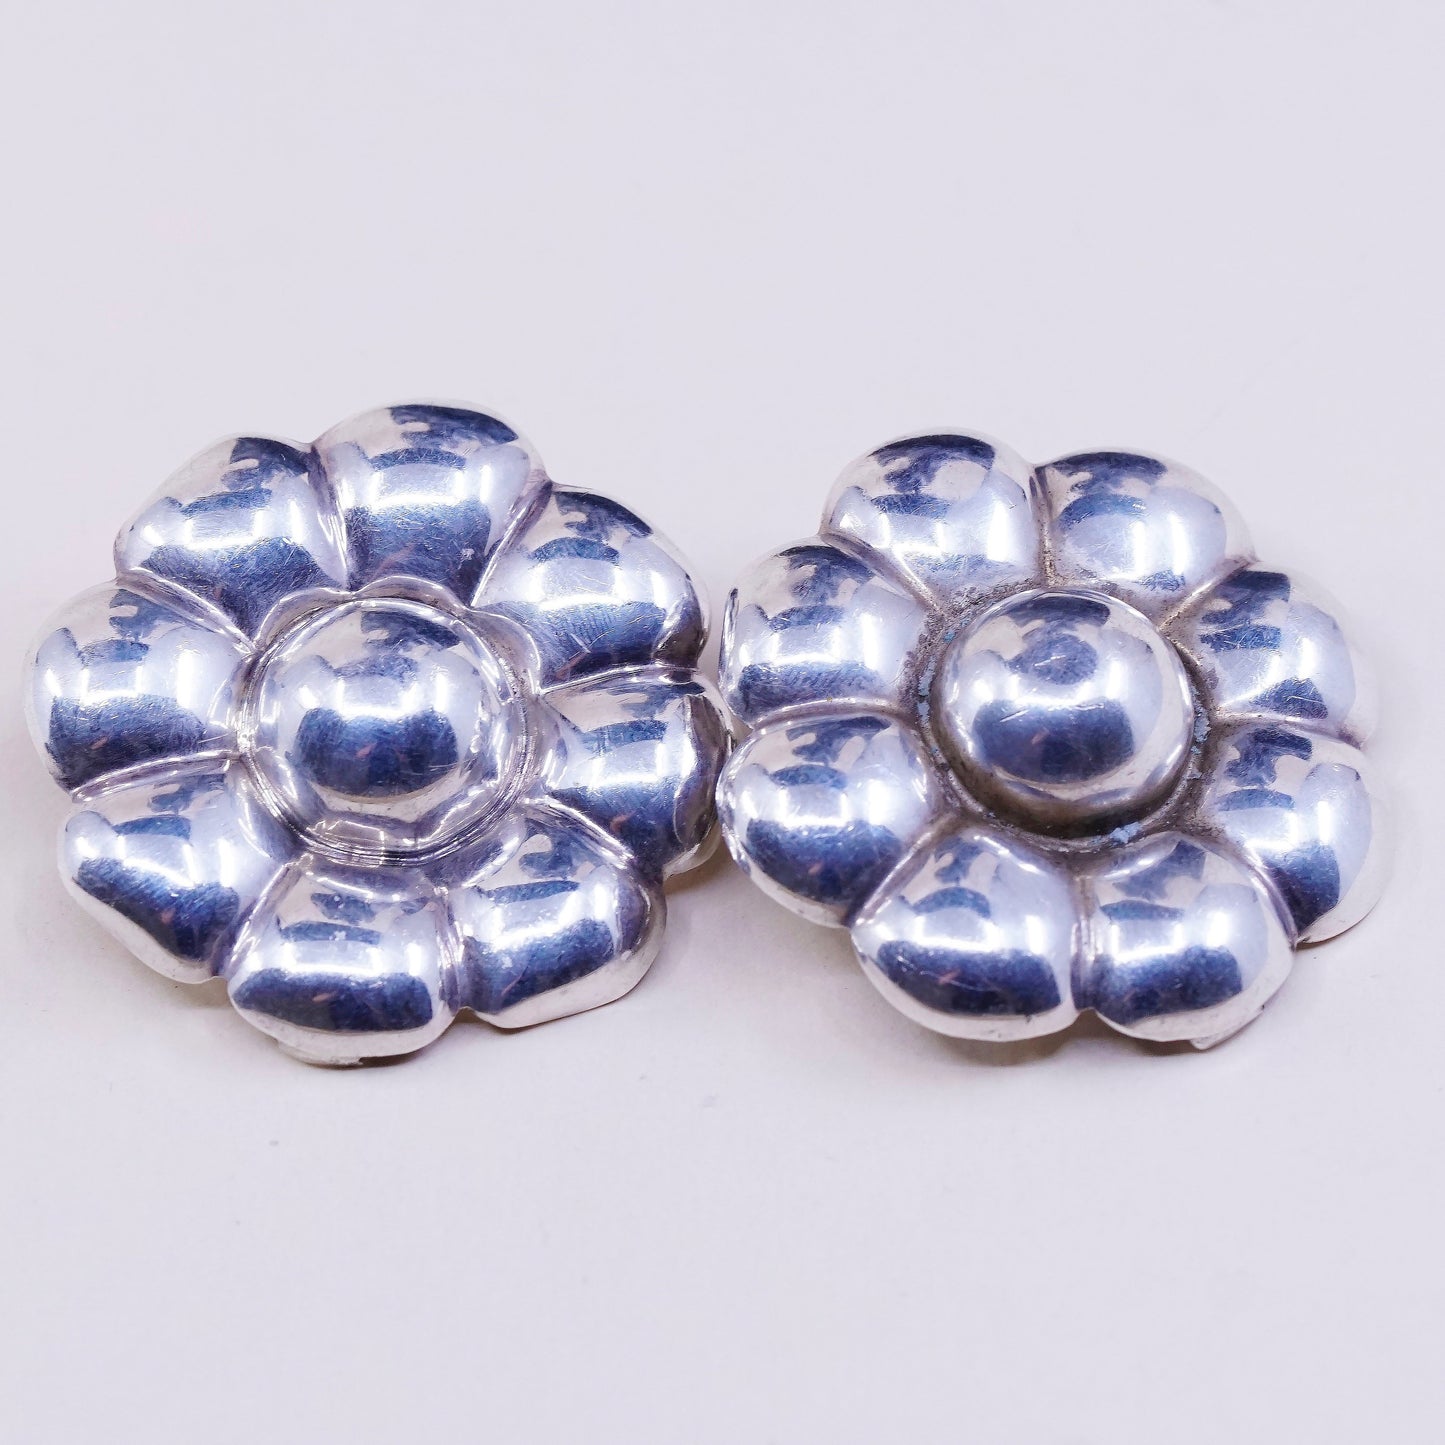 vtg mexico Sterling silver clip on earrings, 925 button w/ flower around